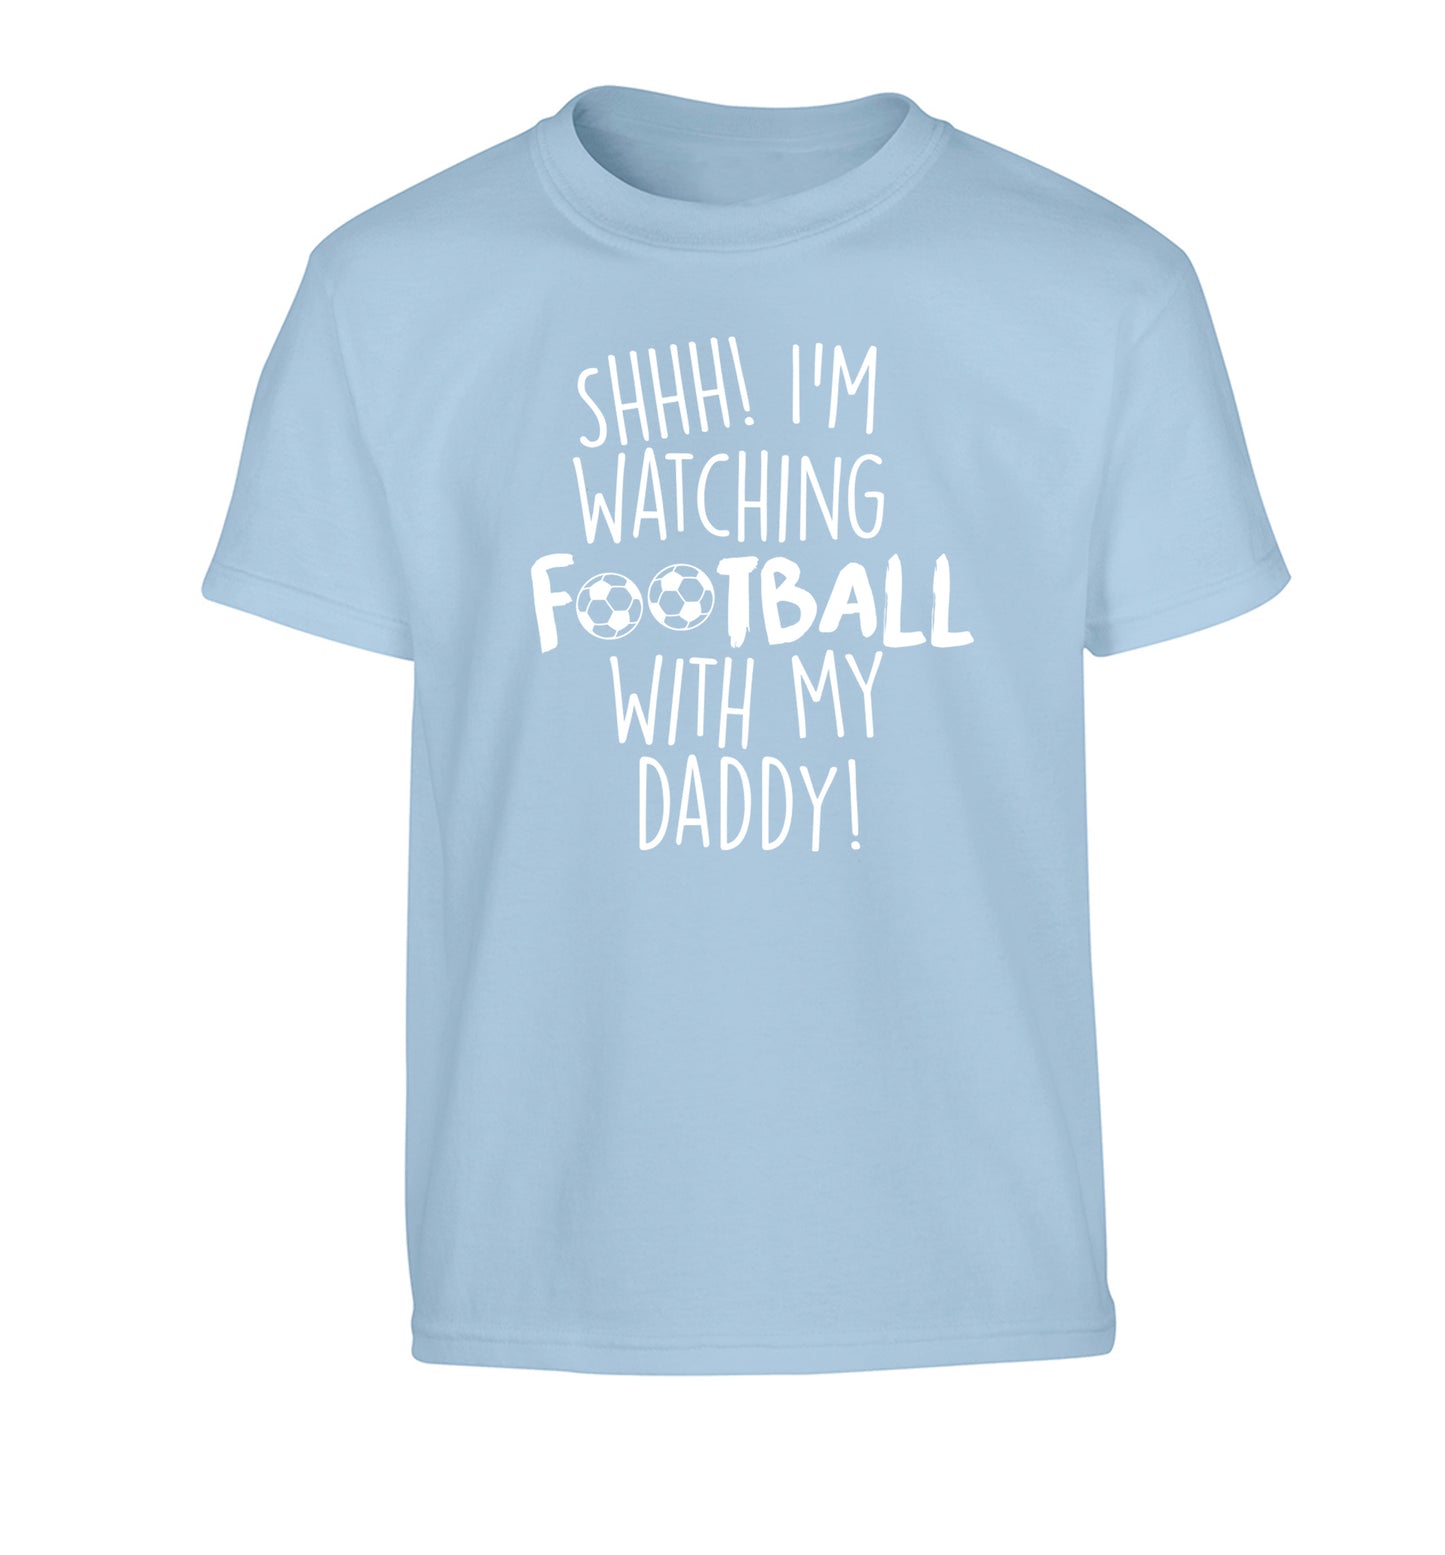 Shhh I'm watching football with my daddy Children's light blue Tshirt 12-14 Years